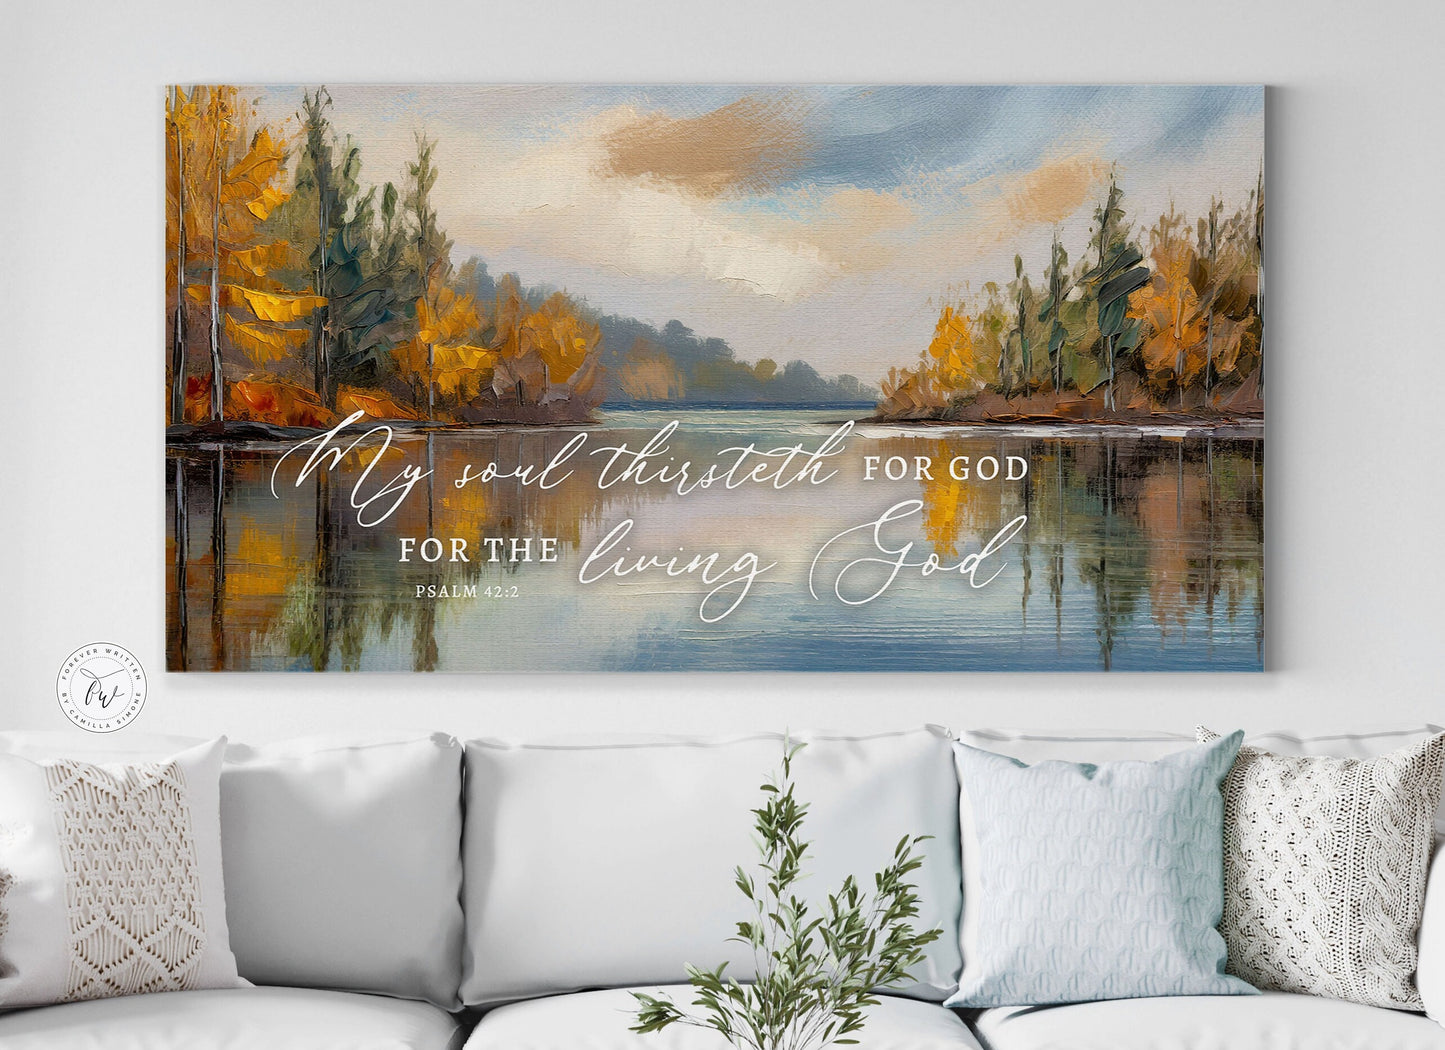 Christian Wall Art My Soul Thirsteth for God, for the Living God, Autumn Lake Painting Print on Canvas Psalm 42 2, Coastal Landscape